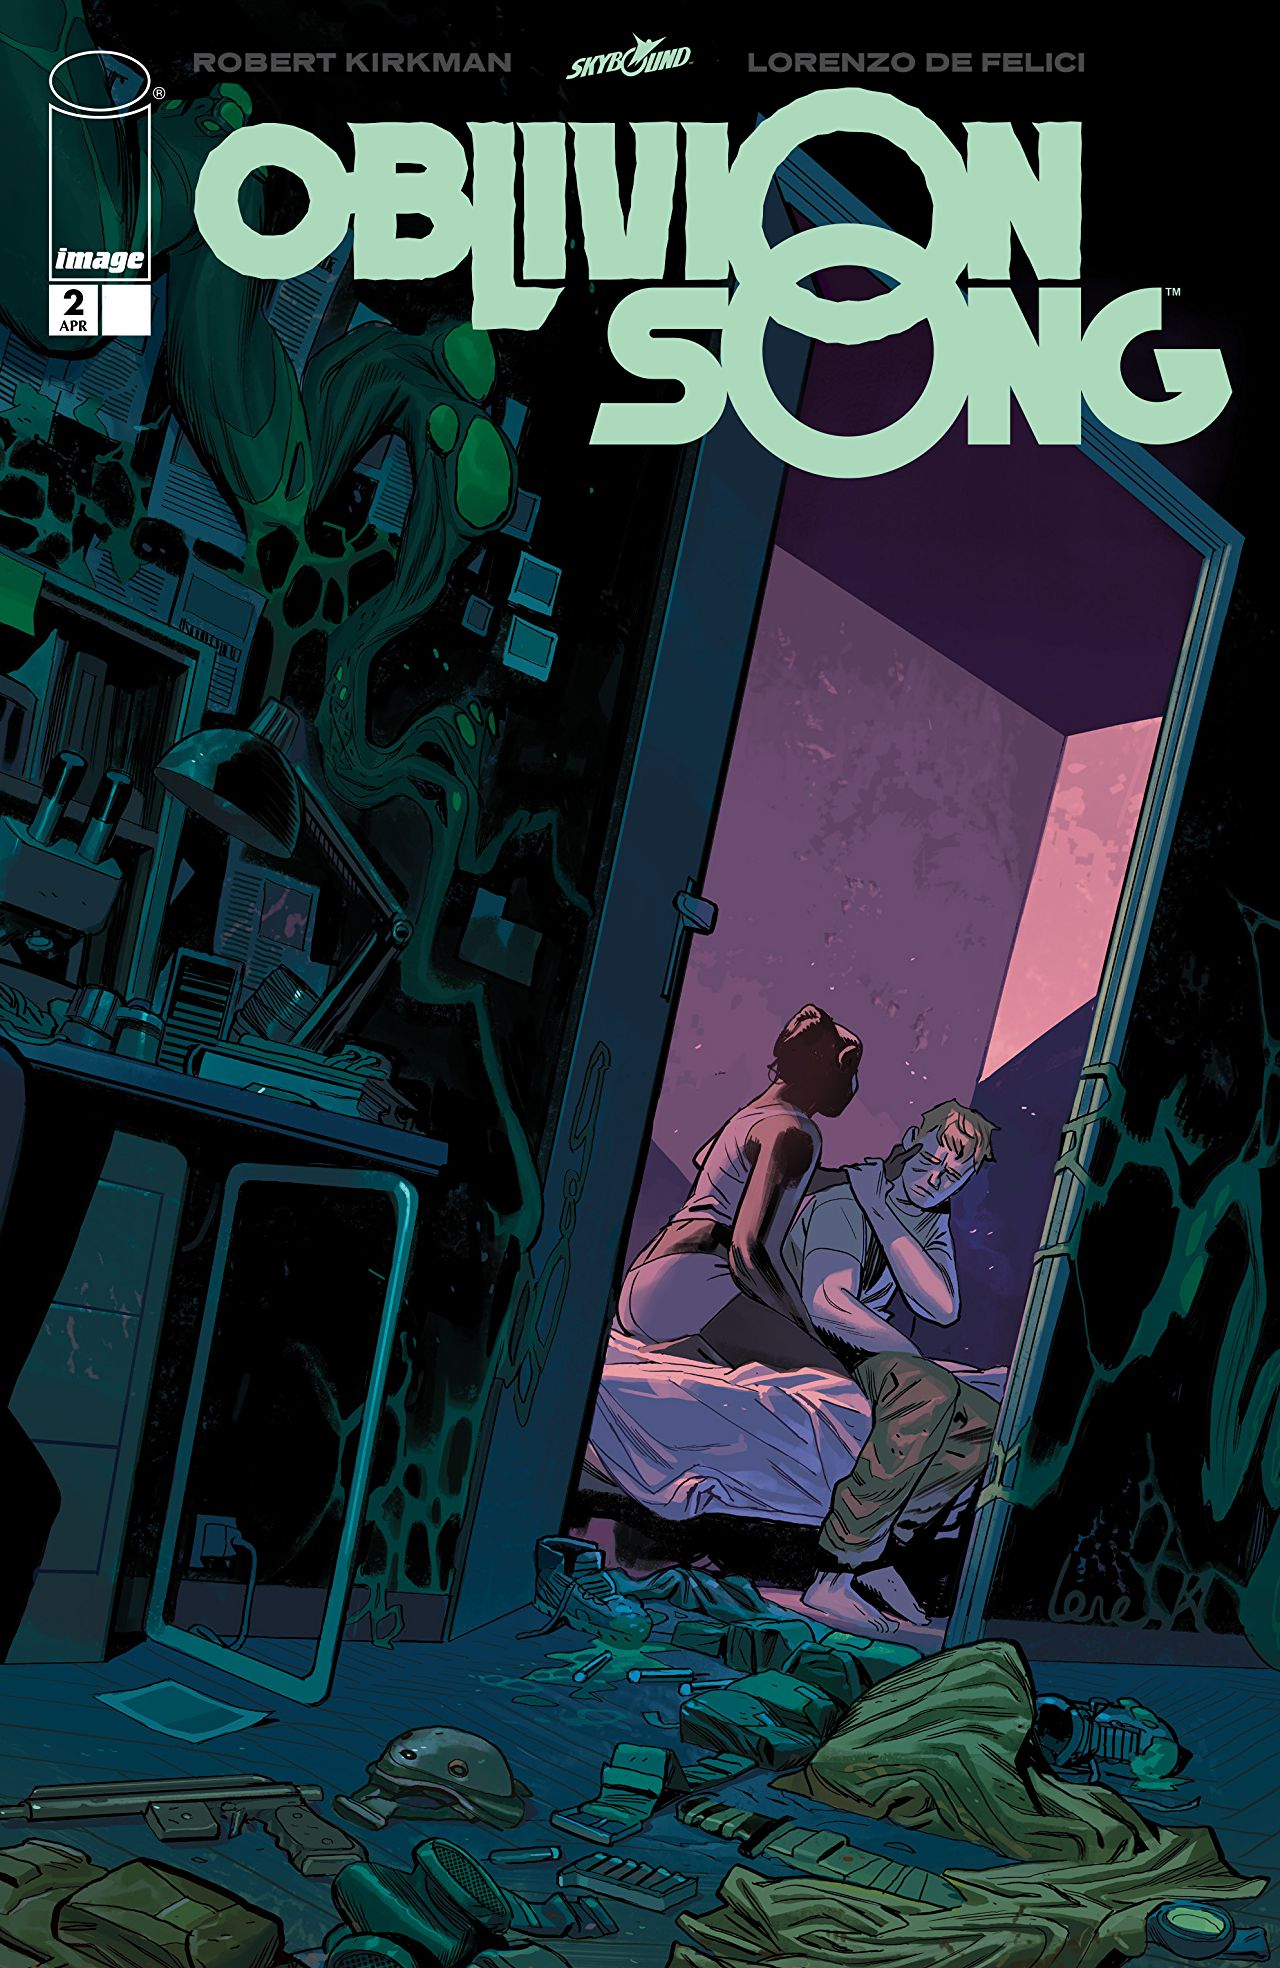 Oblivion Song #2 review: A much slower, character-driven issue